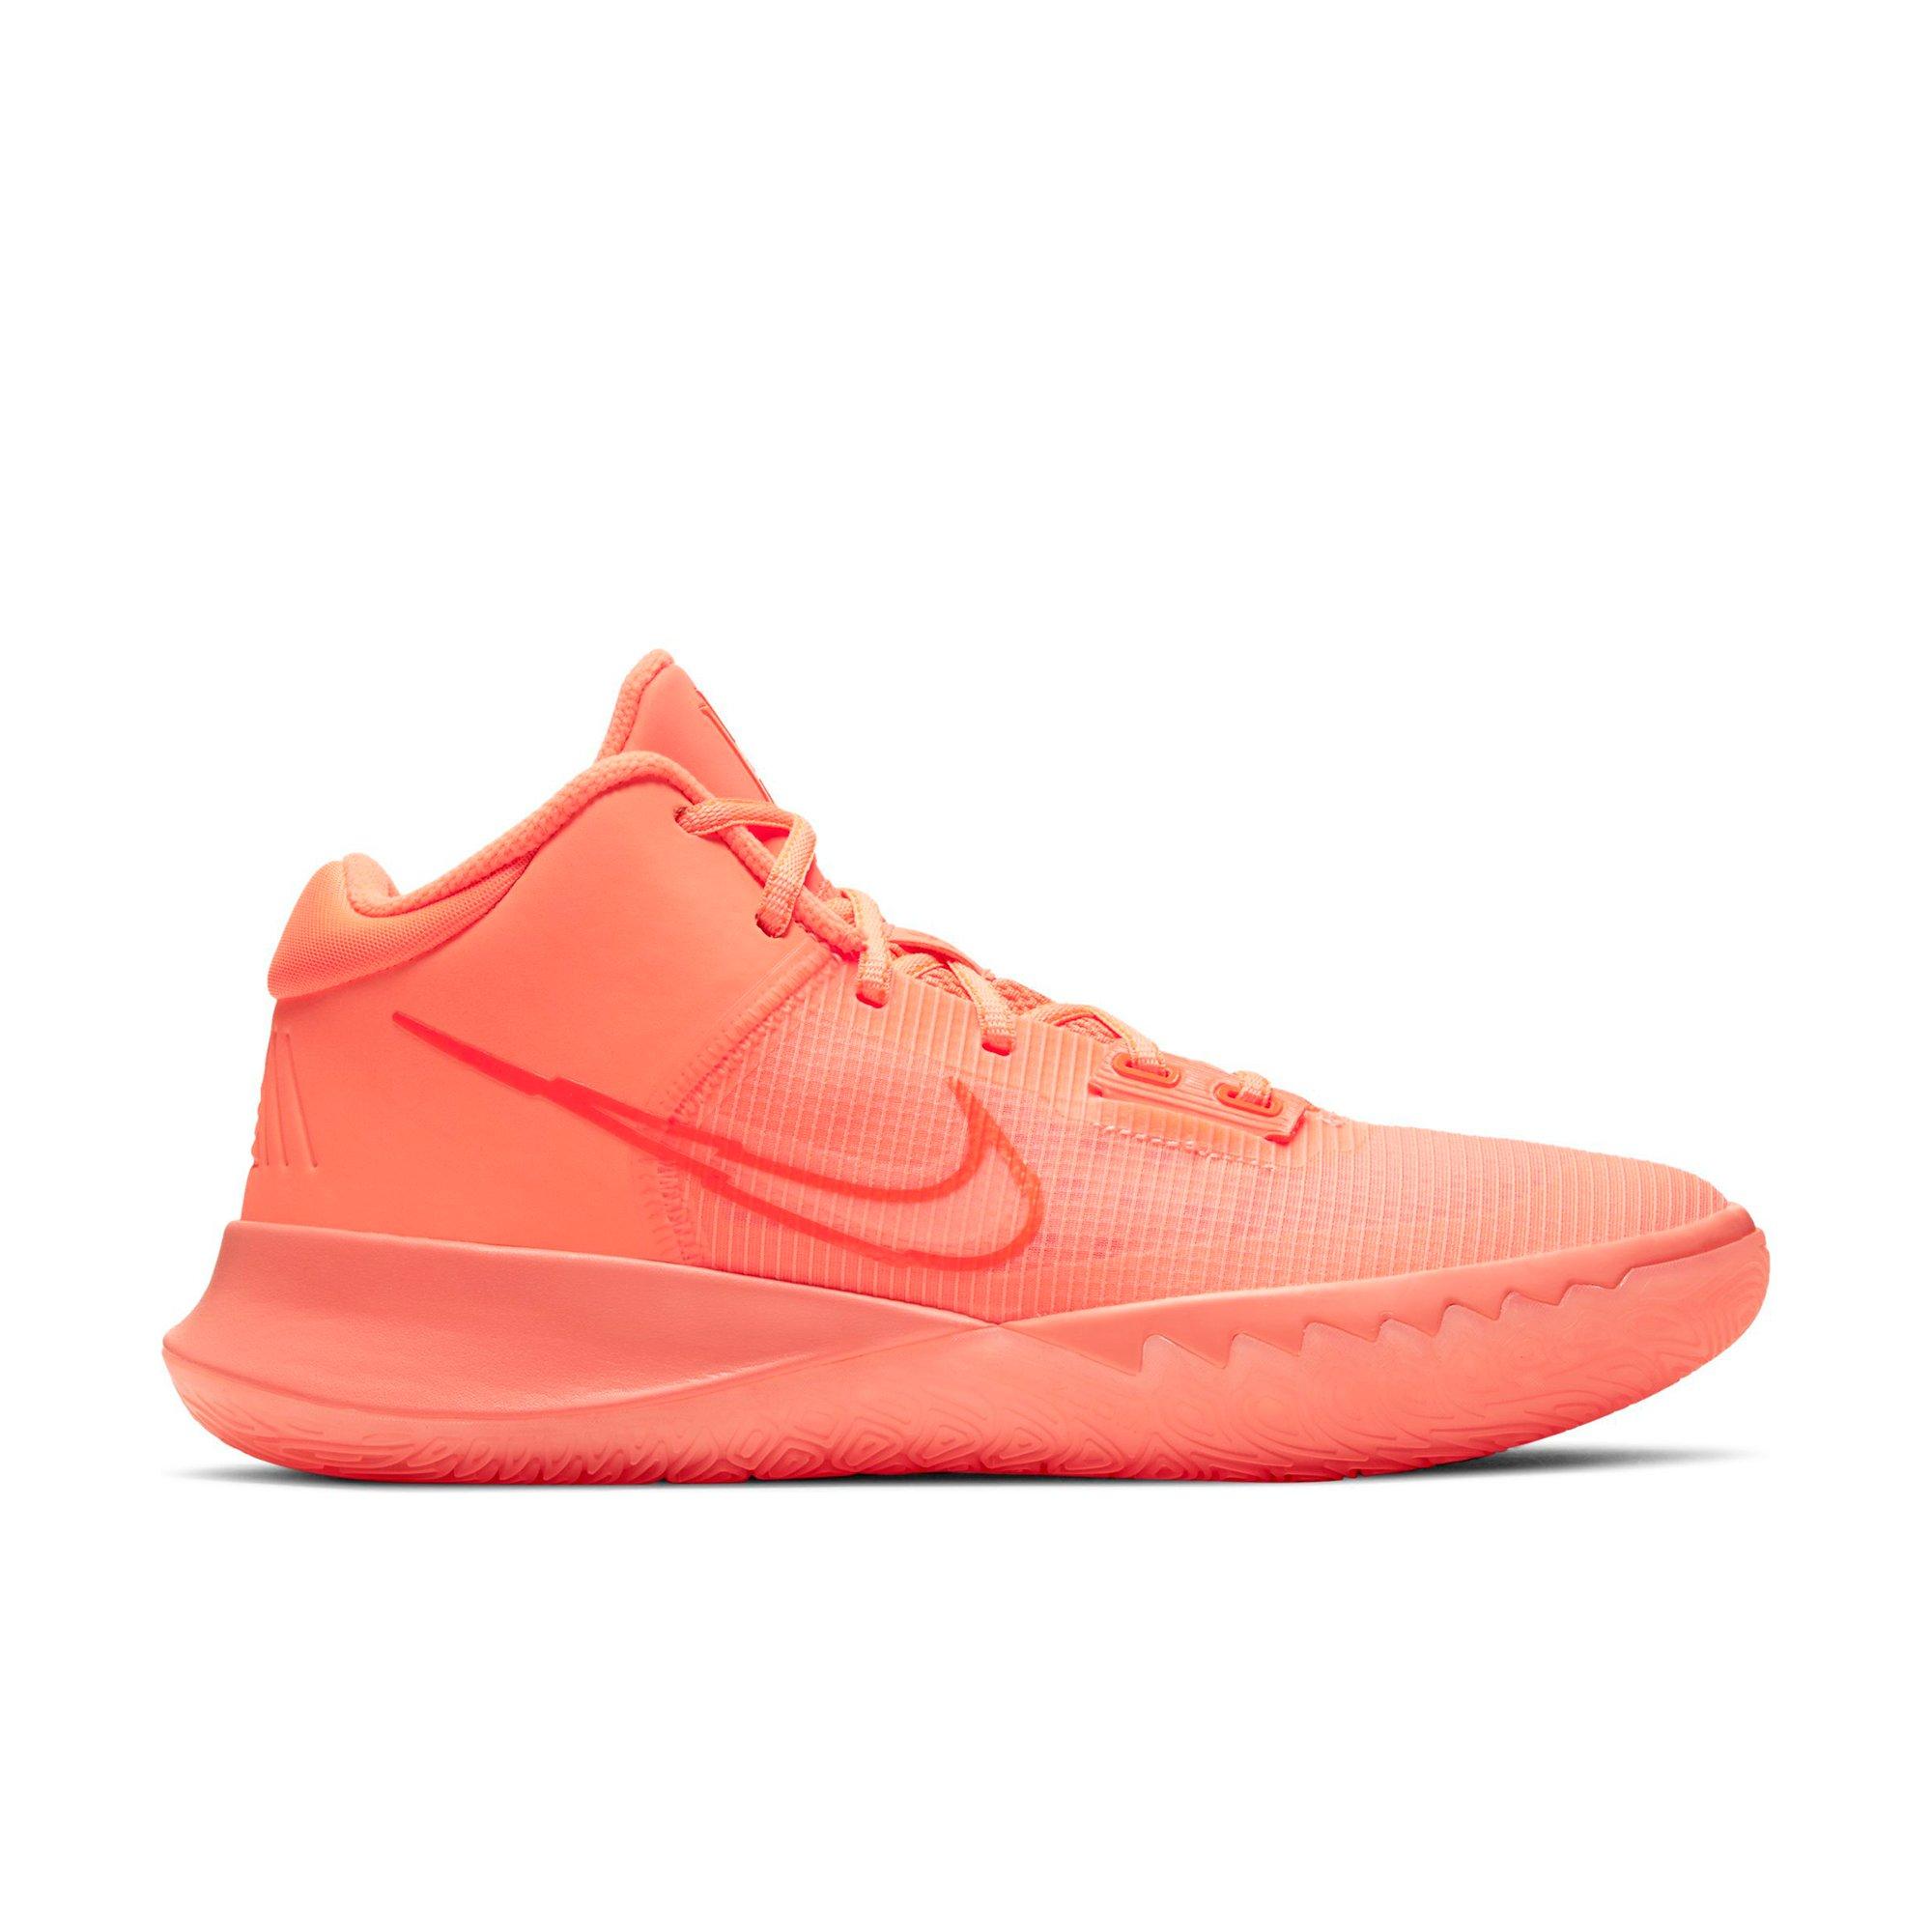 kyrie irving shoes pink